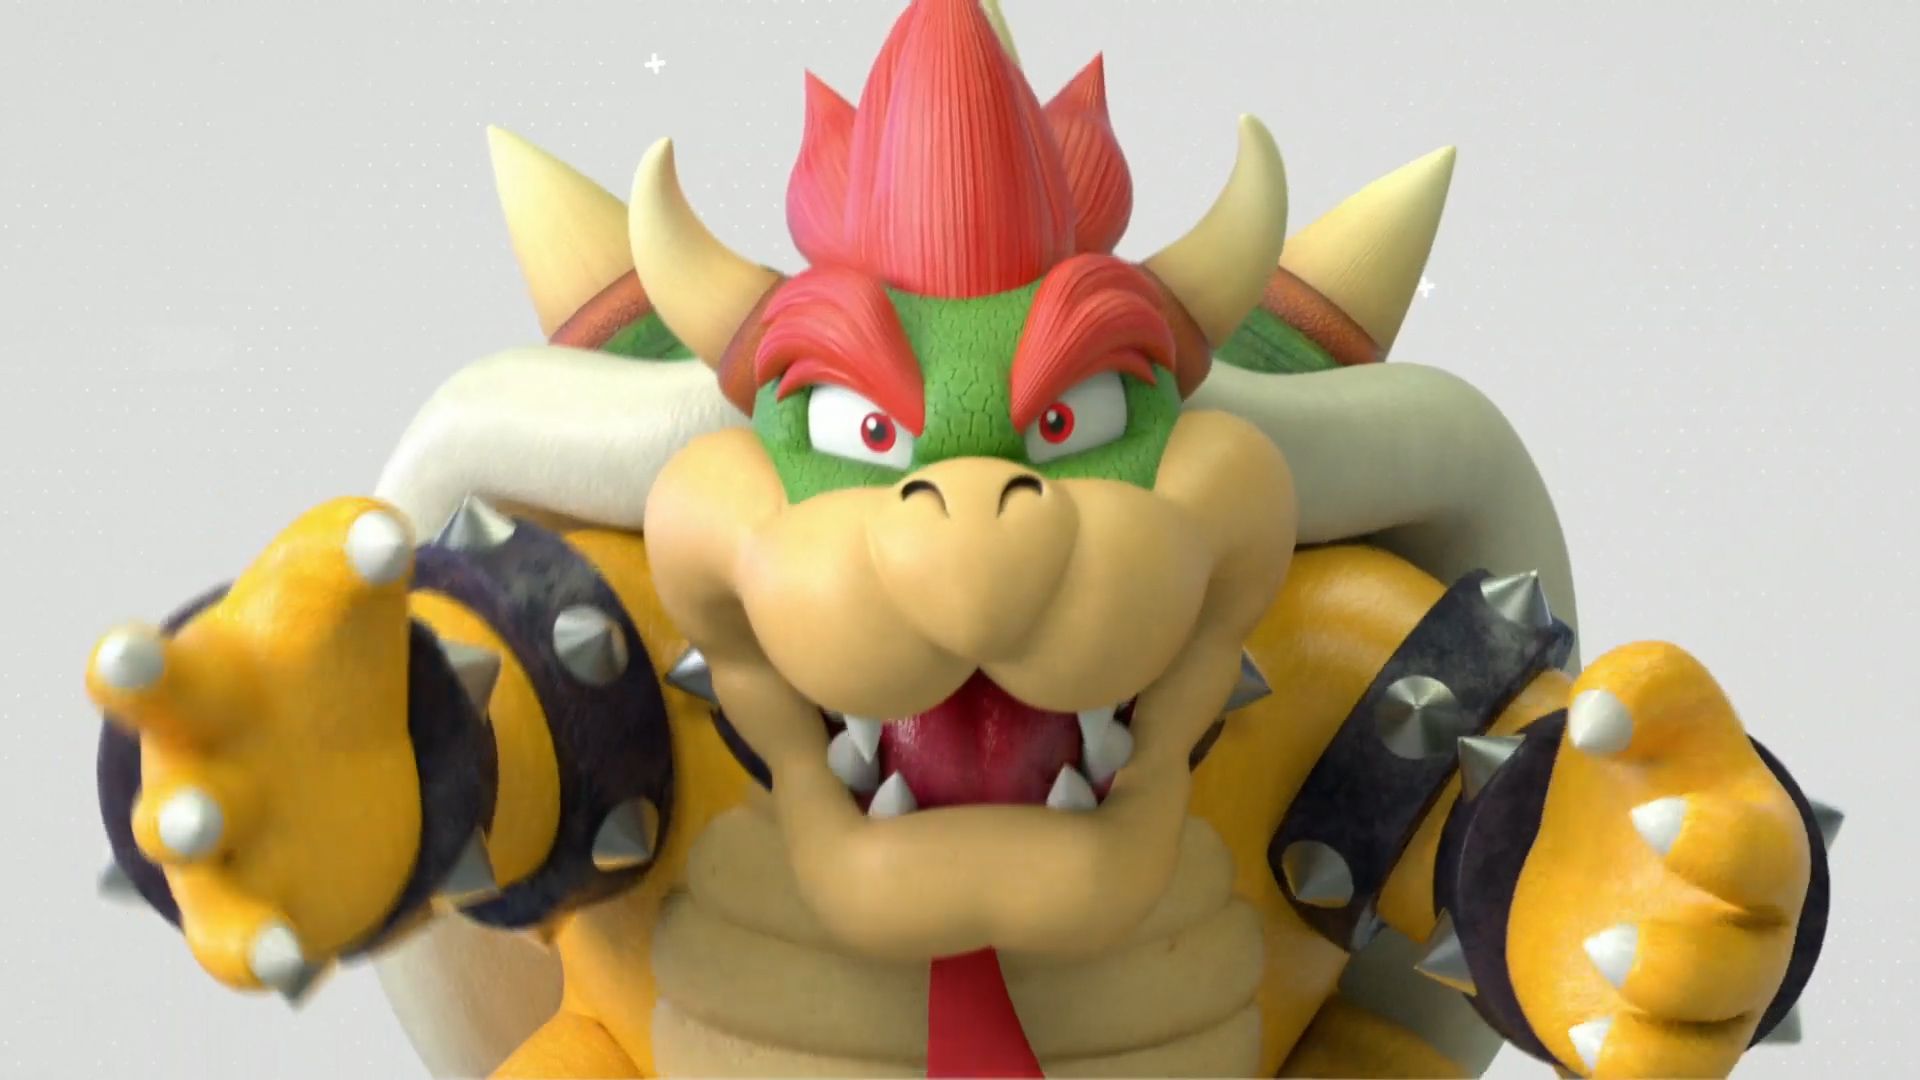 At E3, Nintendo riffs on Doug Bowser’s name in the best way.